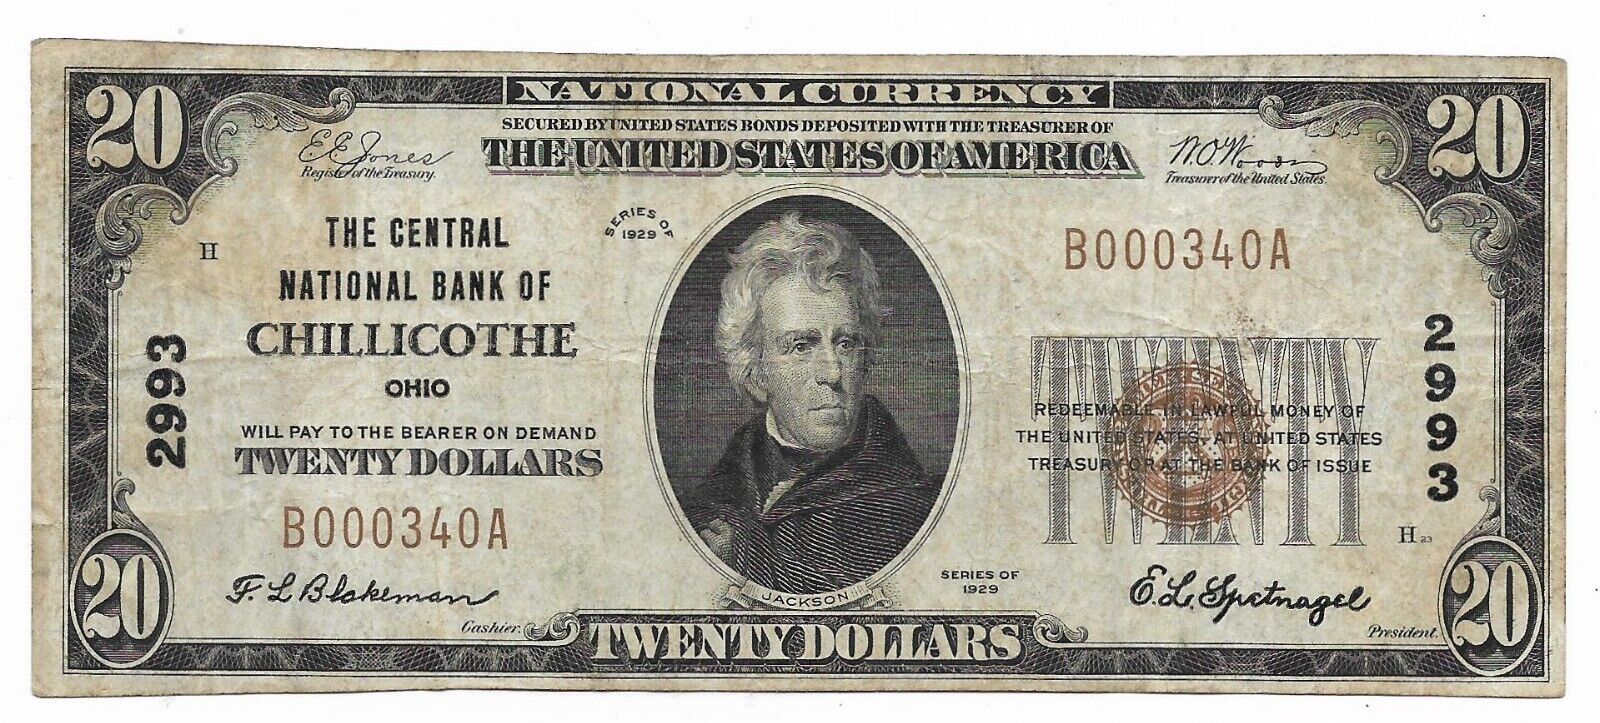 The Central National Bank Of Chillicothe  Ohio - 1929 $20 Note